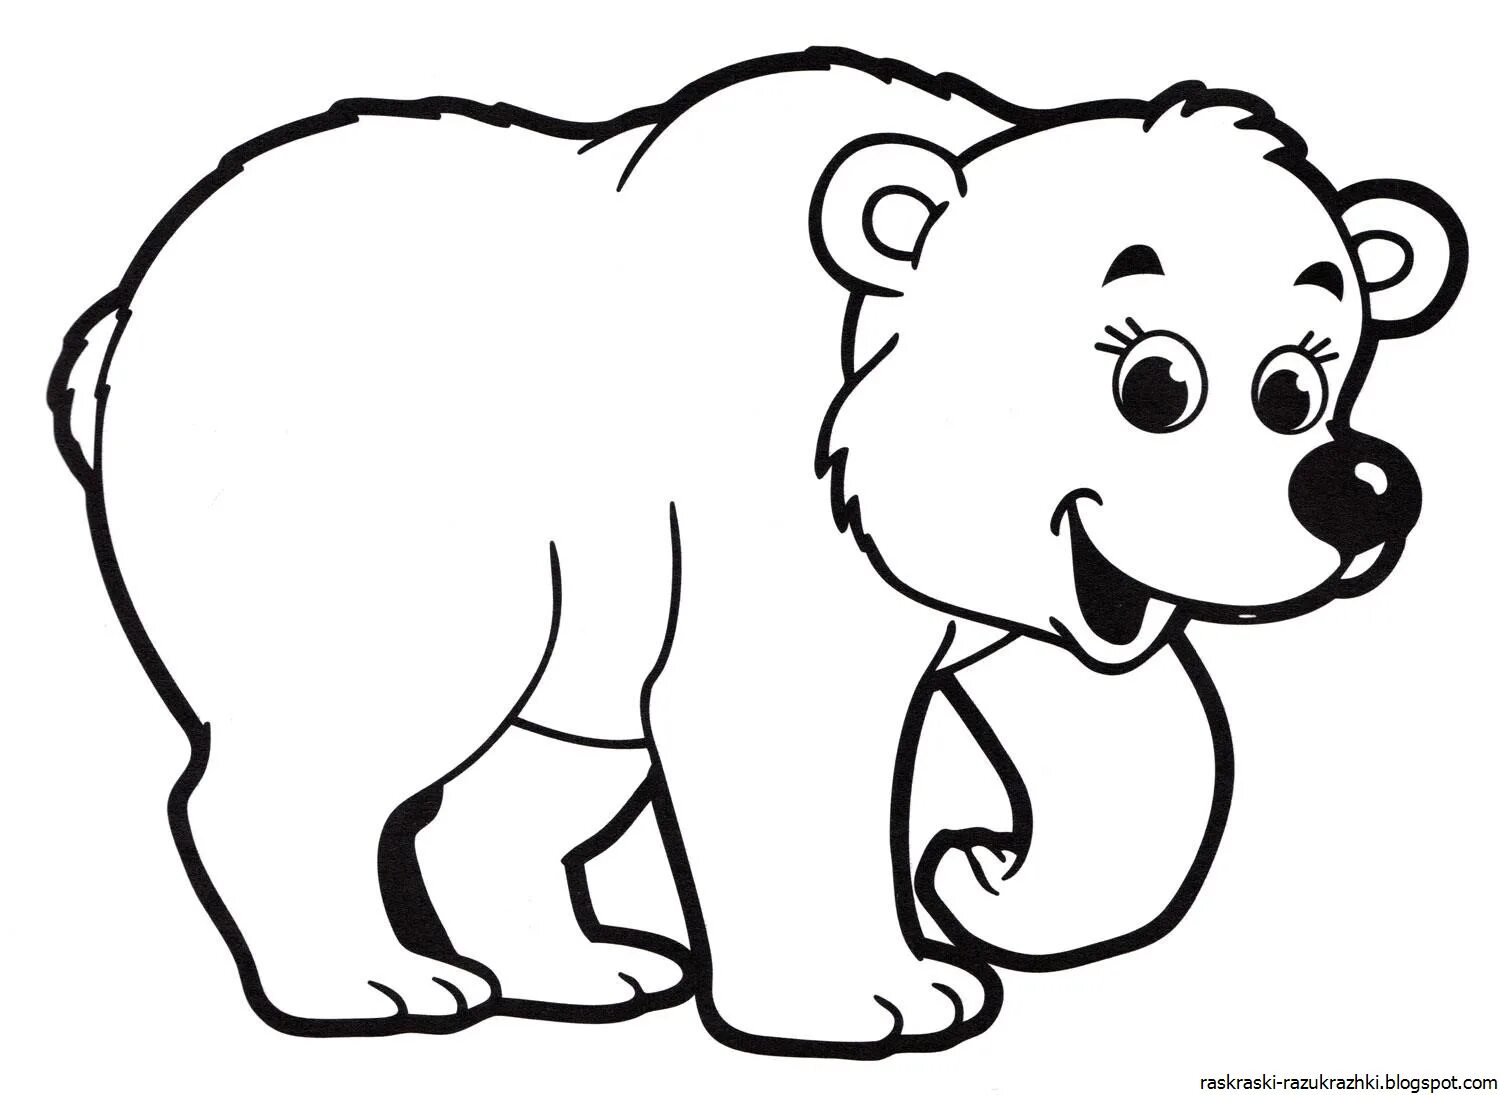 Inspirational polar bear coloring book for 3-4 year olds